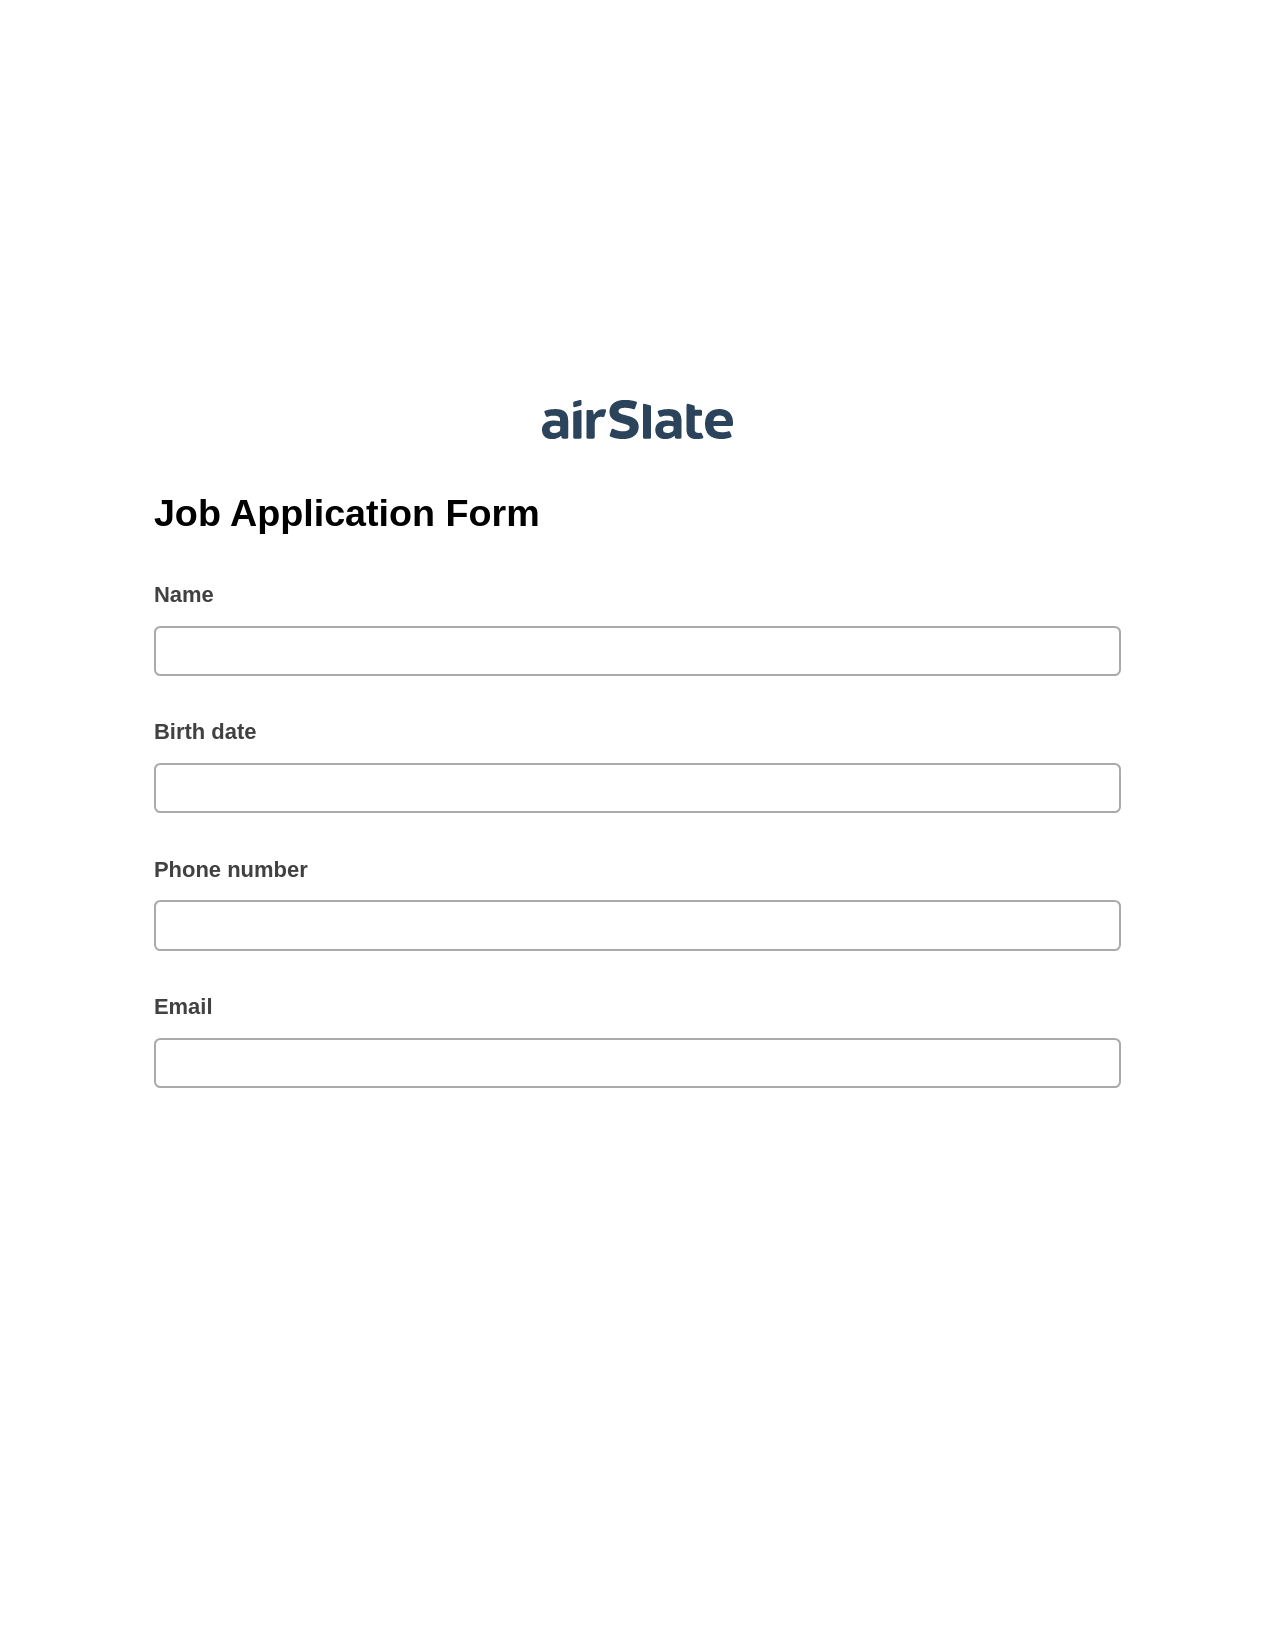 Job Application Form Pre-fill from Excel Spreadsheet Dropdown Options Bot, Audit Trail Bot, Text Message Notification Postfinish Bot